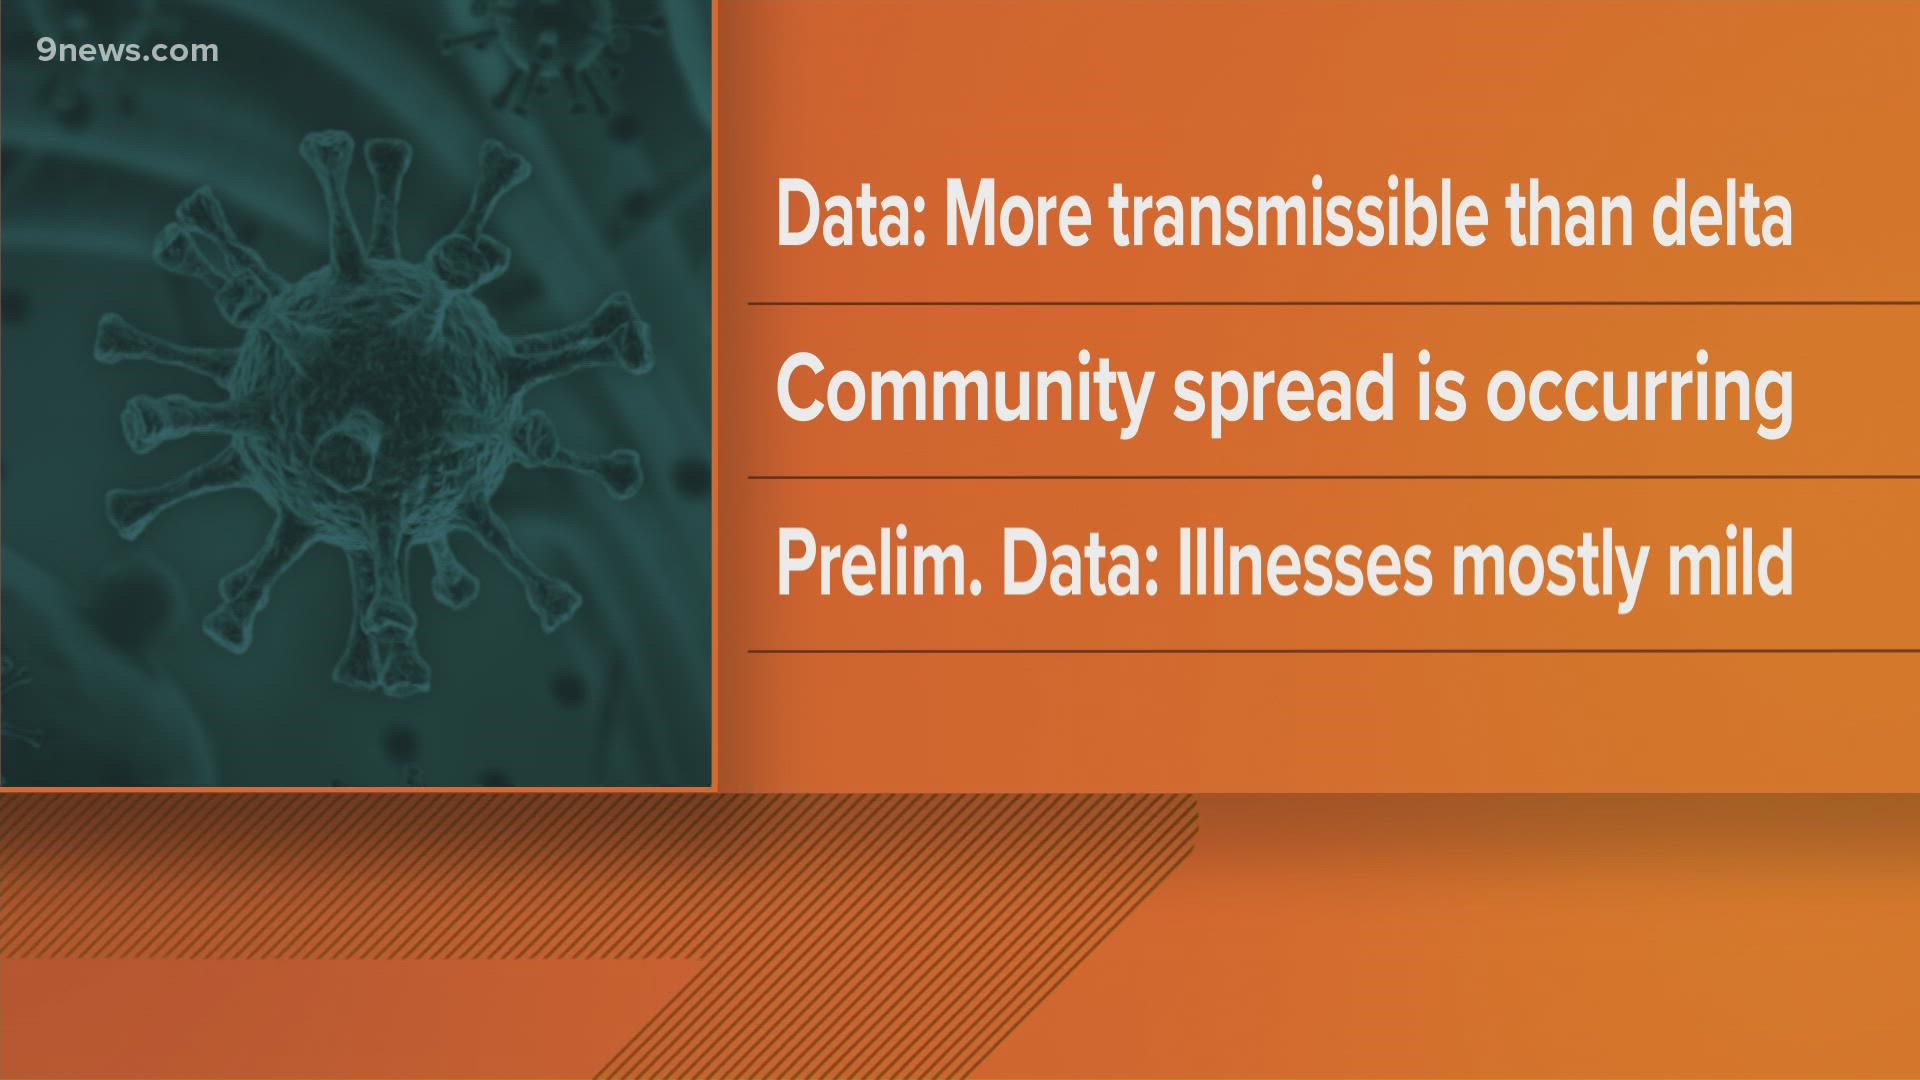 9Health Expert Dr. Payal Kohli says data suggests the omicron variant is more transmissible than the delta variant.